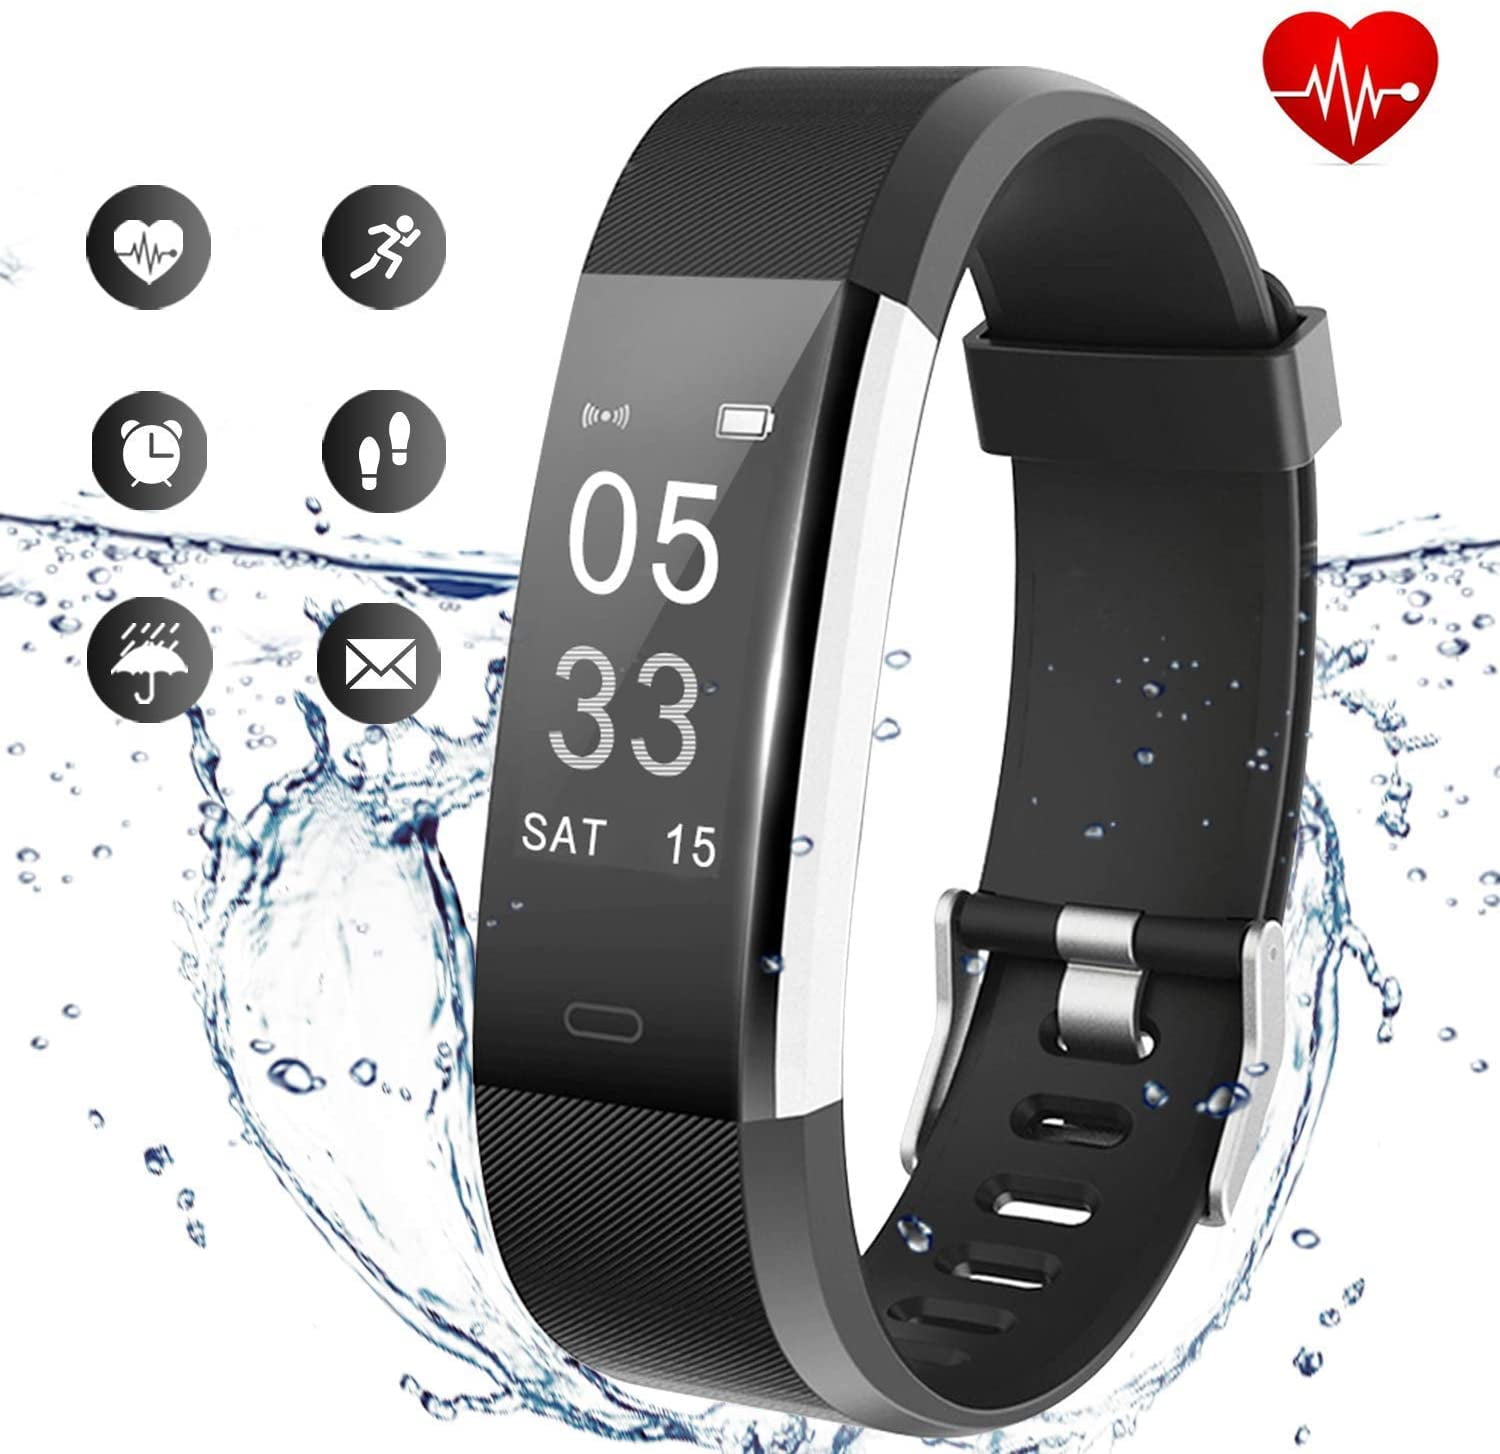 lintelek fitness tracker with heart rate monitor